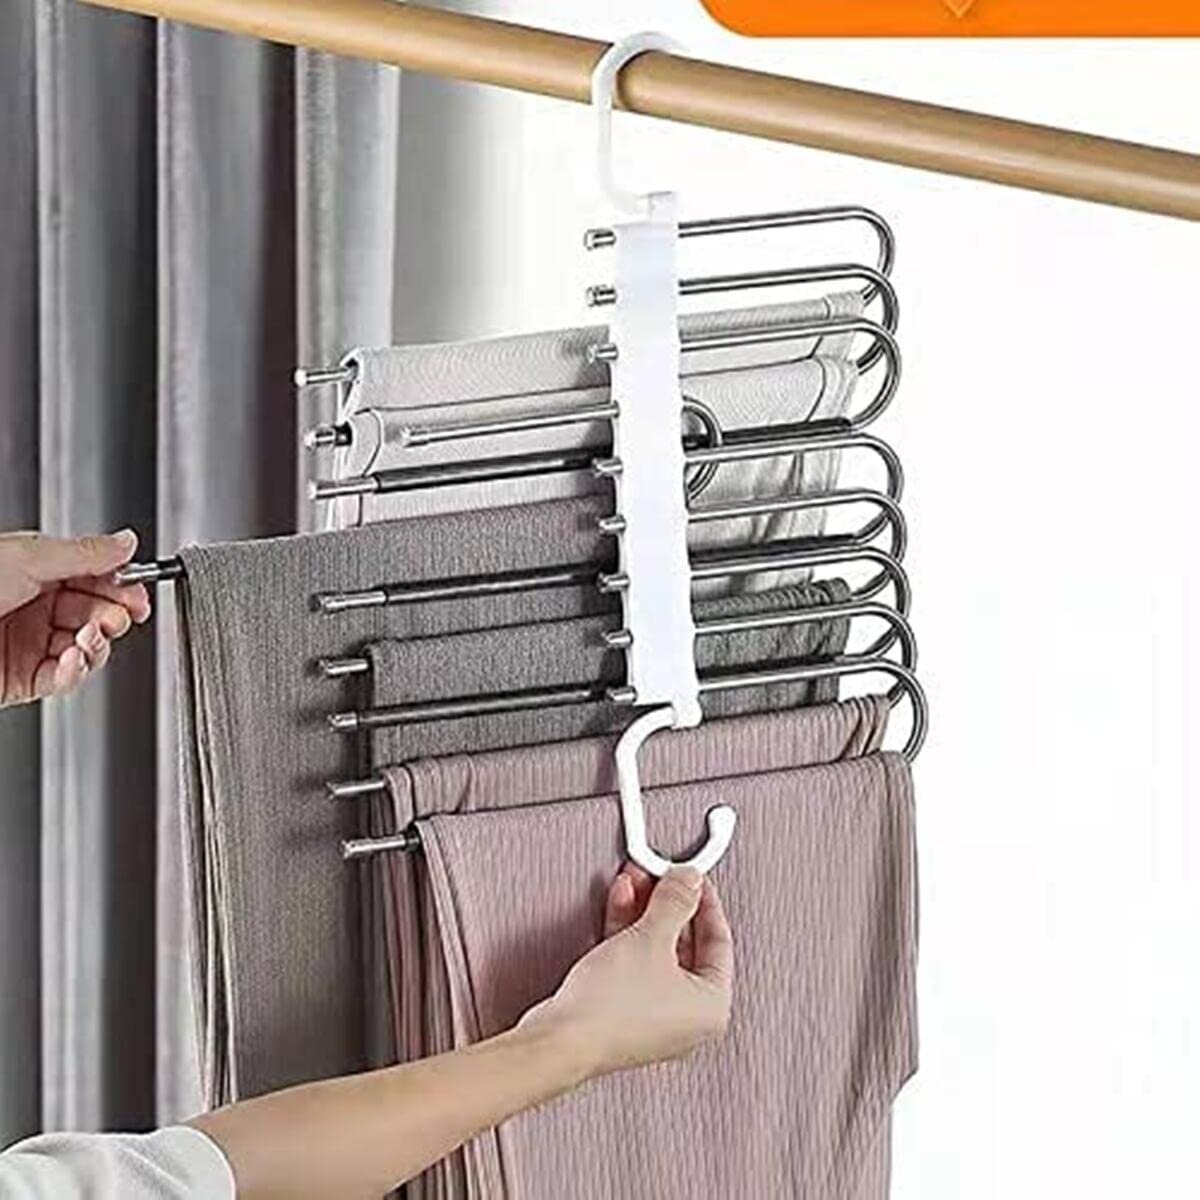 Multi-function Trousers Hanger Stainless Steel Clothes Storage for Pants Jeans 